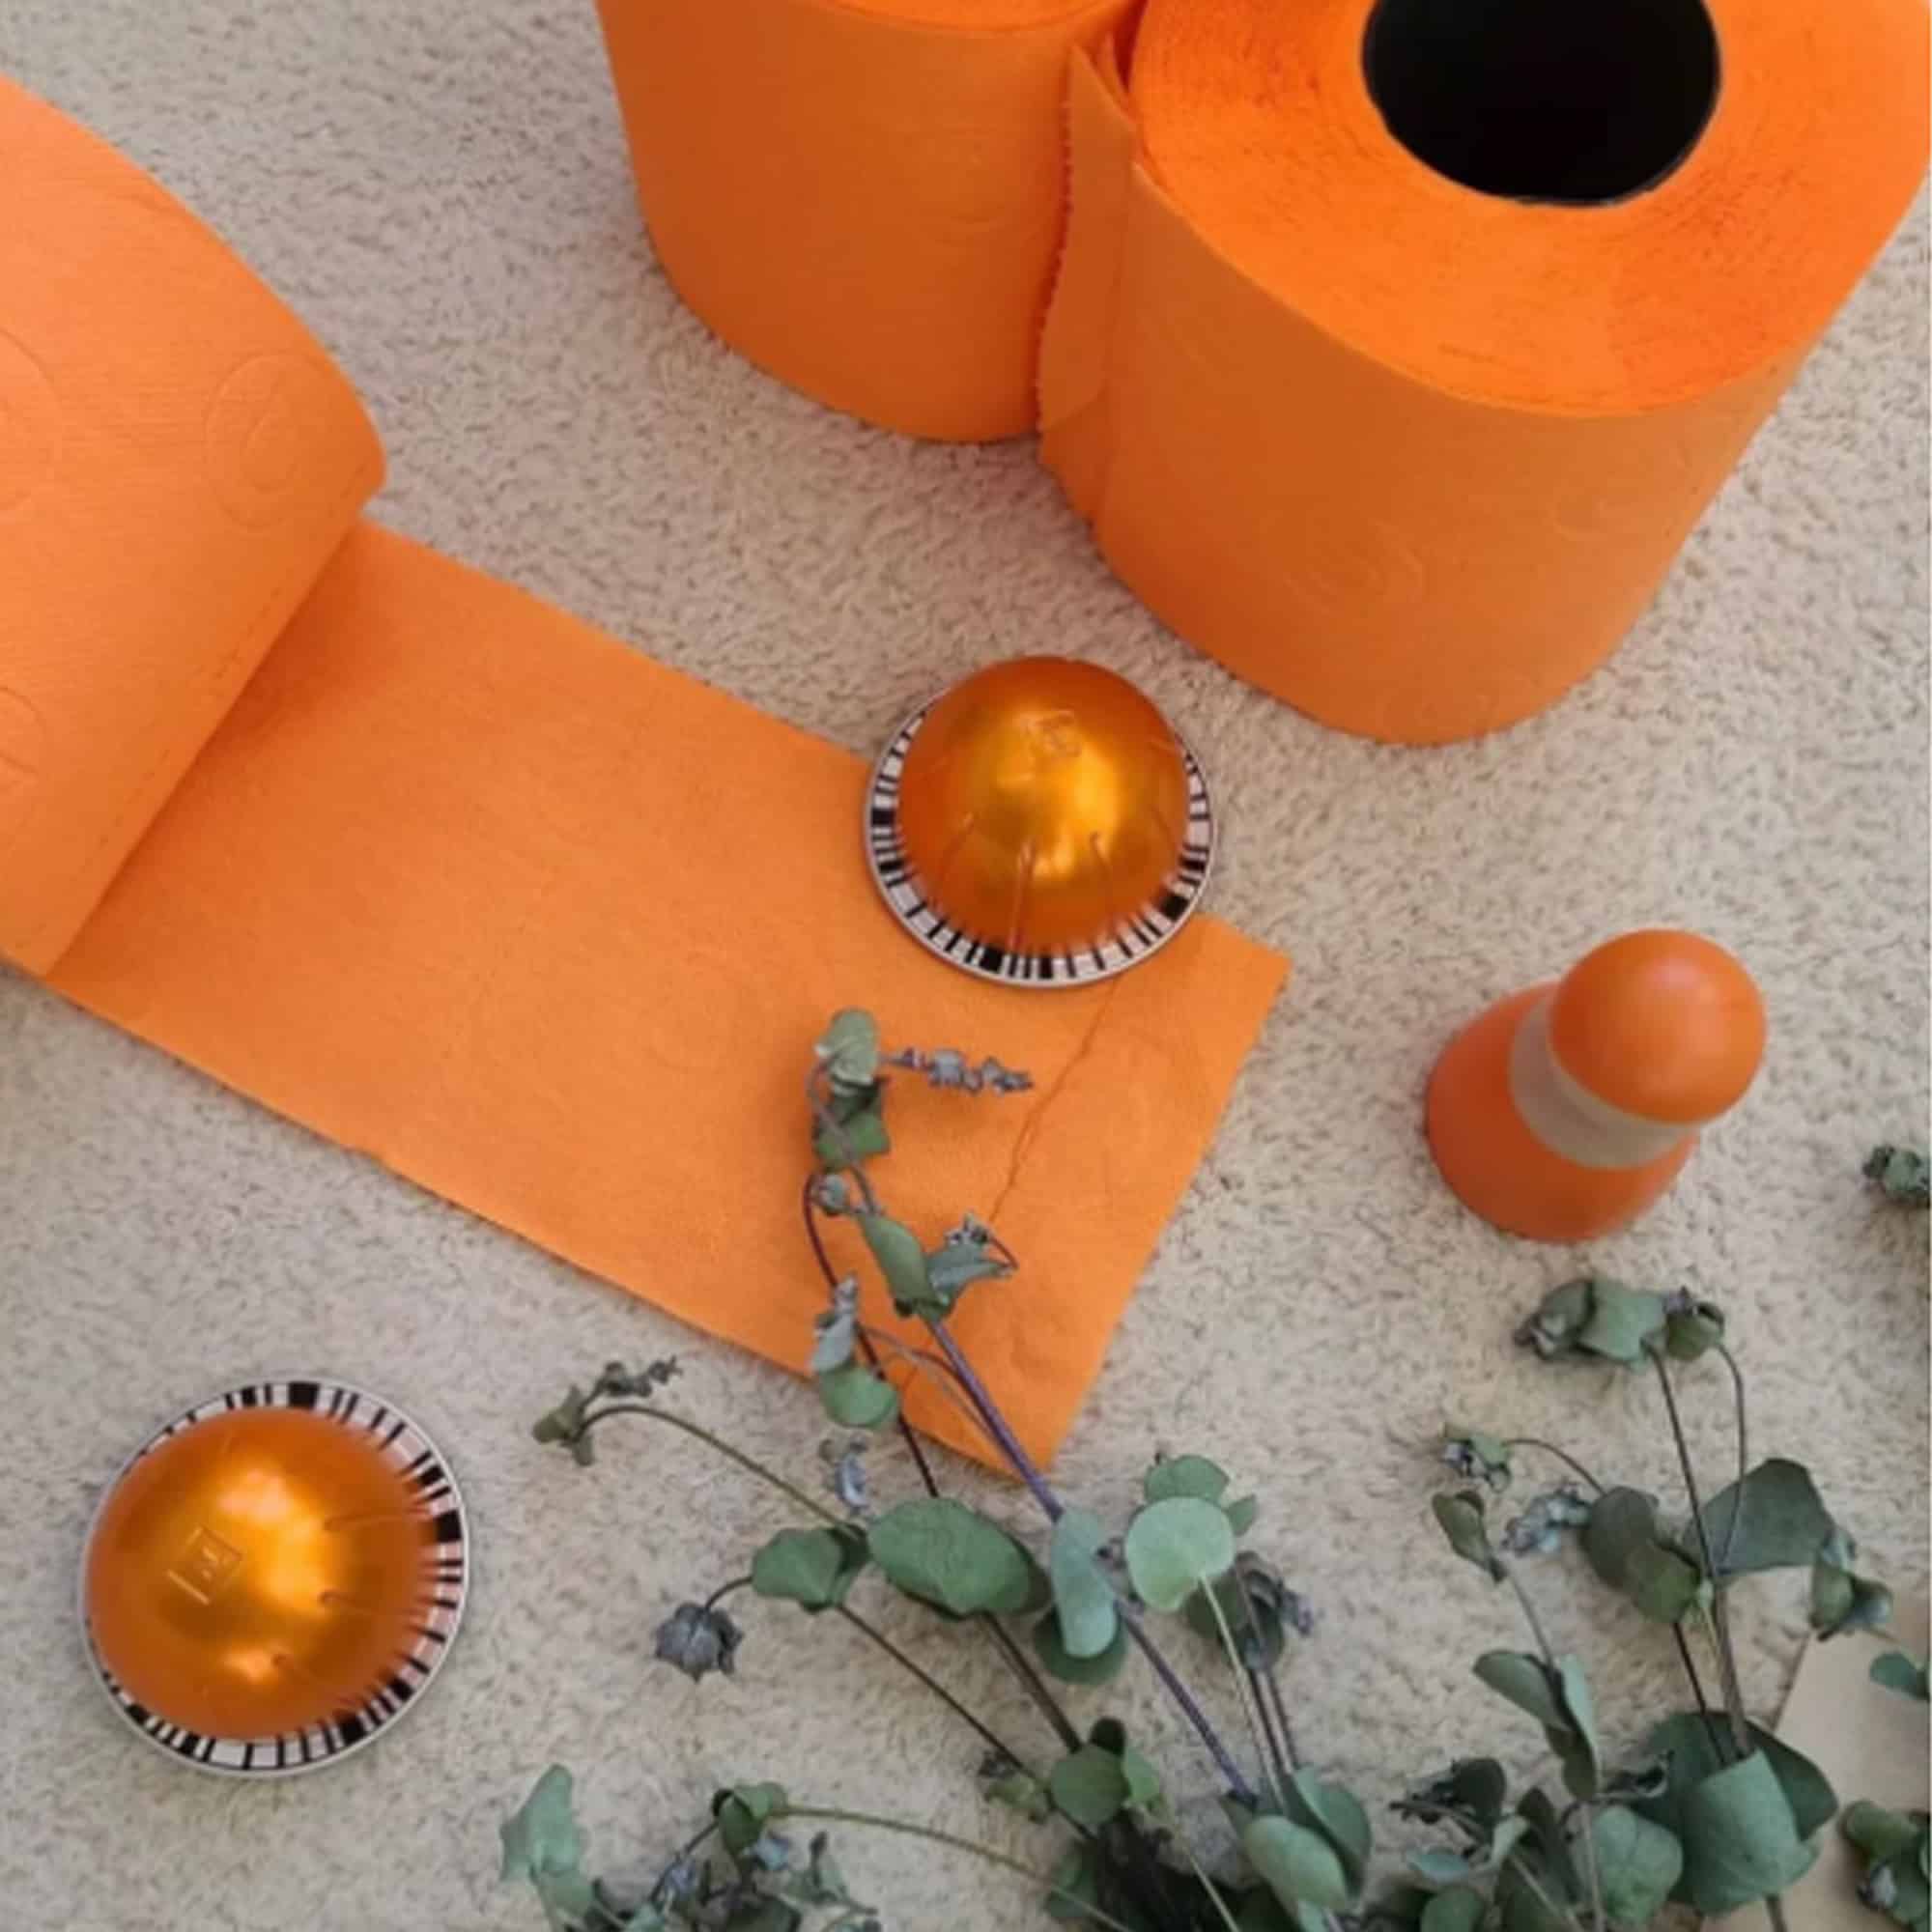 https://roll-lux.com/wp-content/uploads/2020/01/RB200066410-Orange-Toilet-Paper-3-ply-Gift-Box-3-Rolls-pack-140-Premium-Quality-sheets-2.jpg